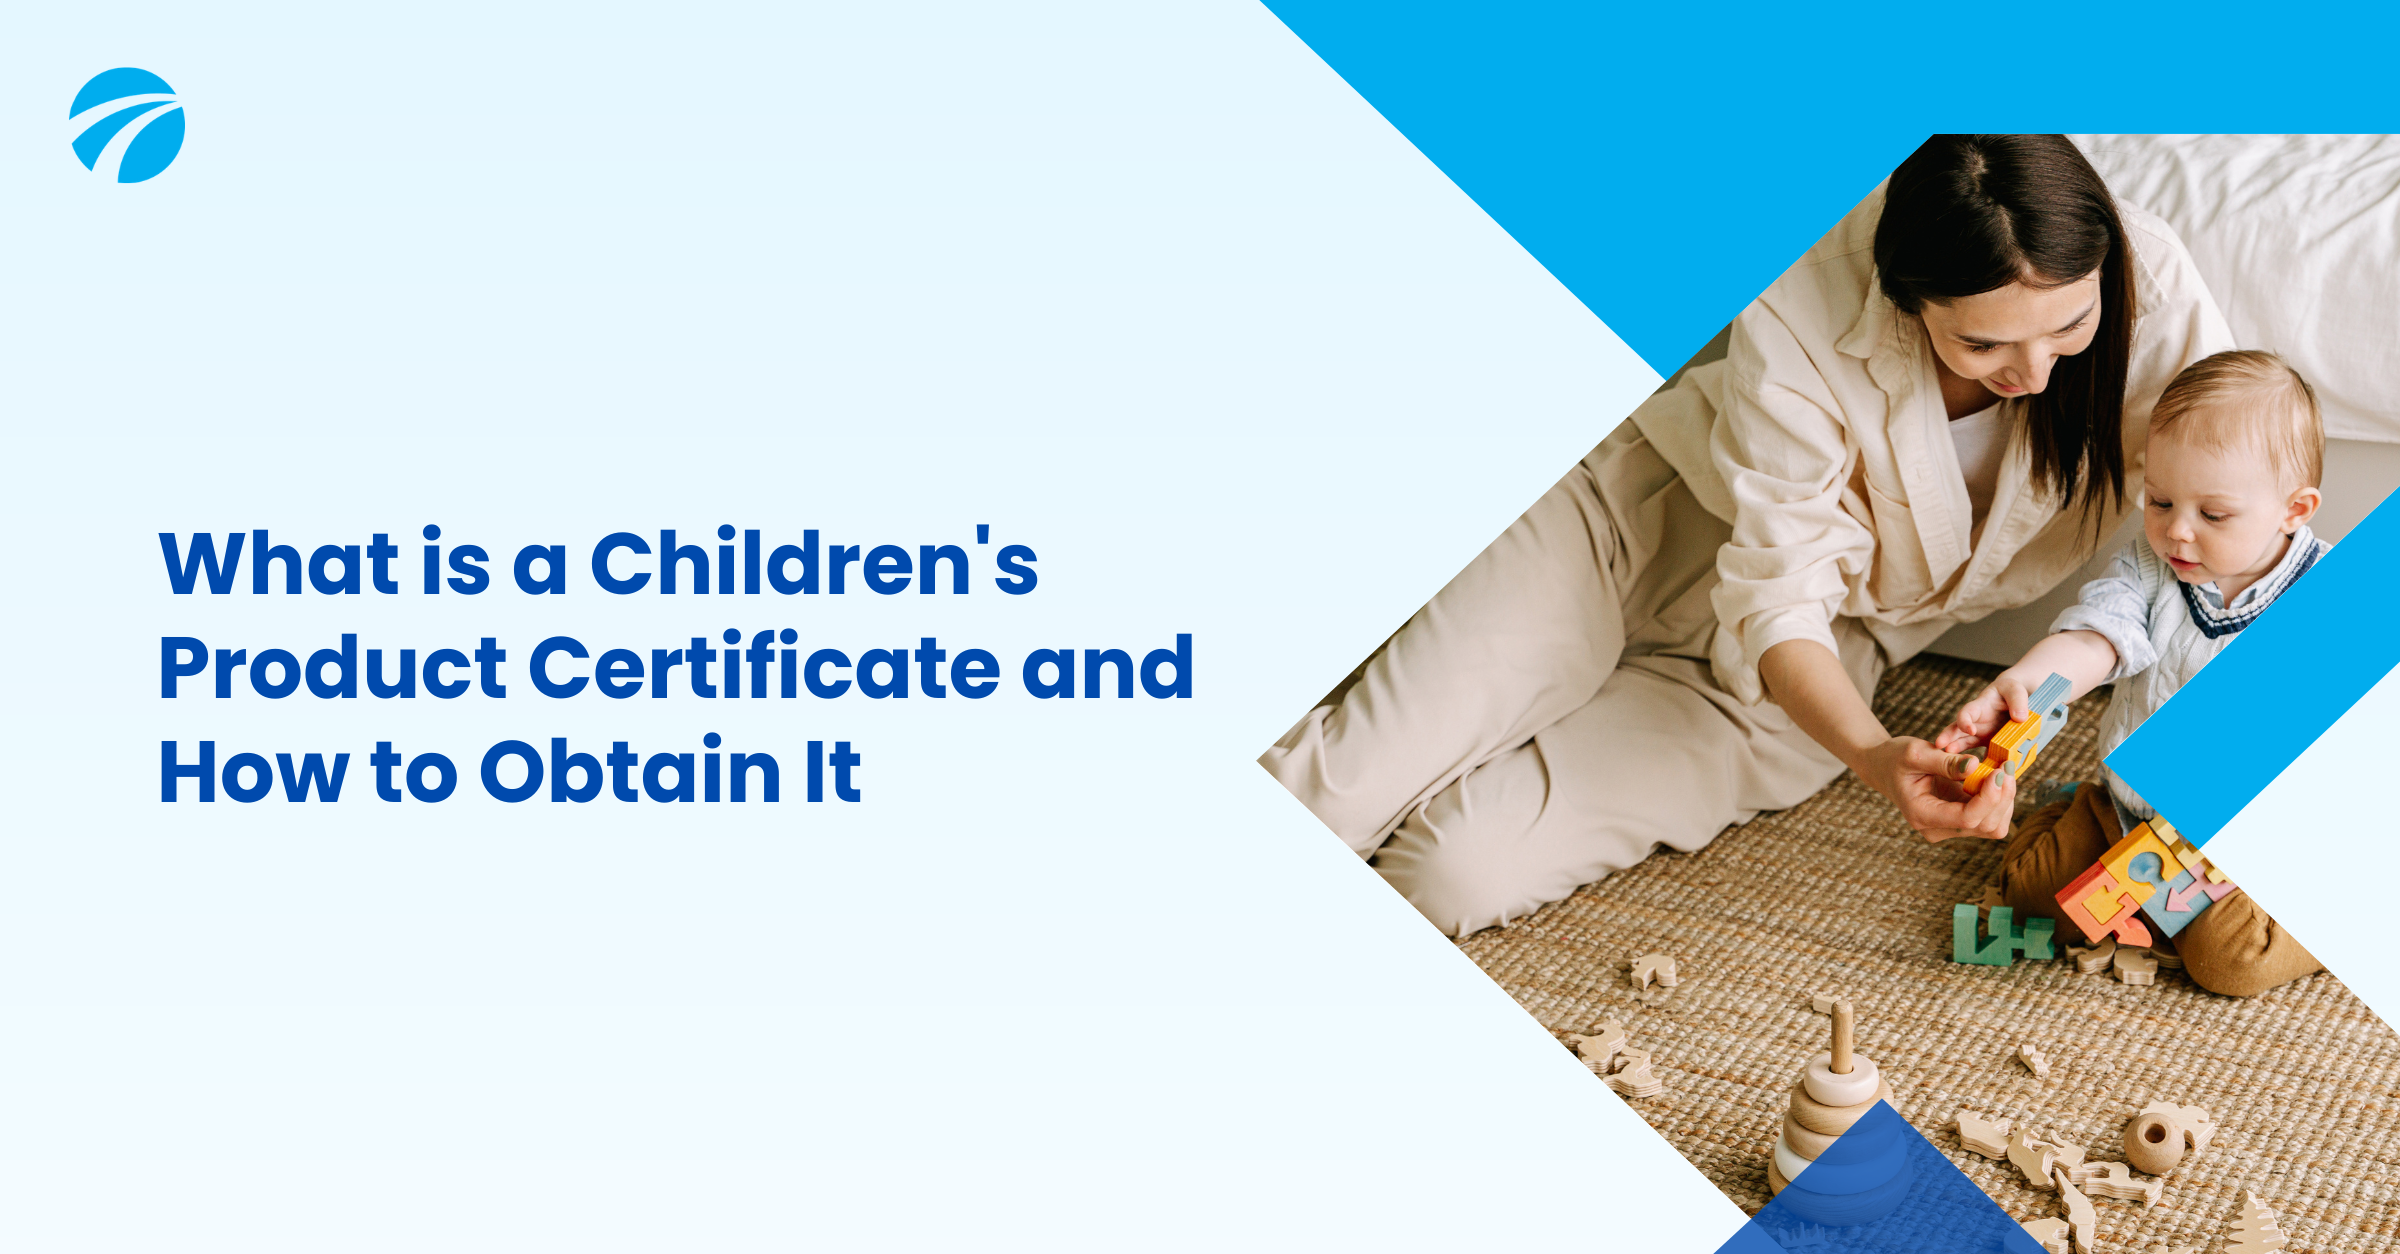 What is a Children's Product Certificate and How to Obtain It